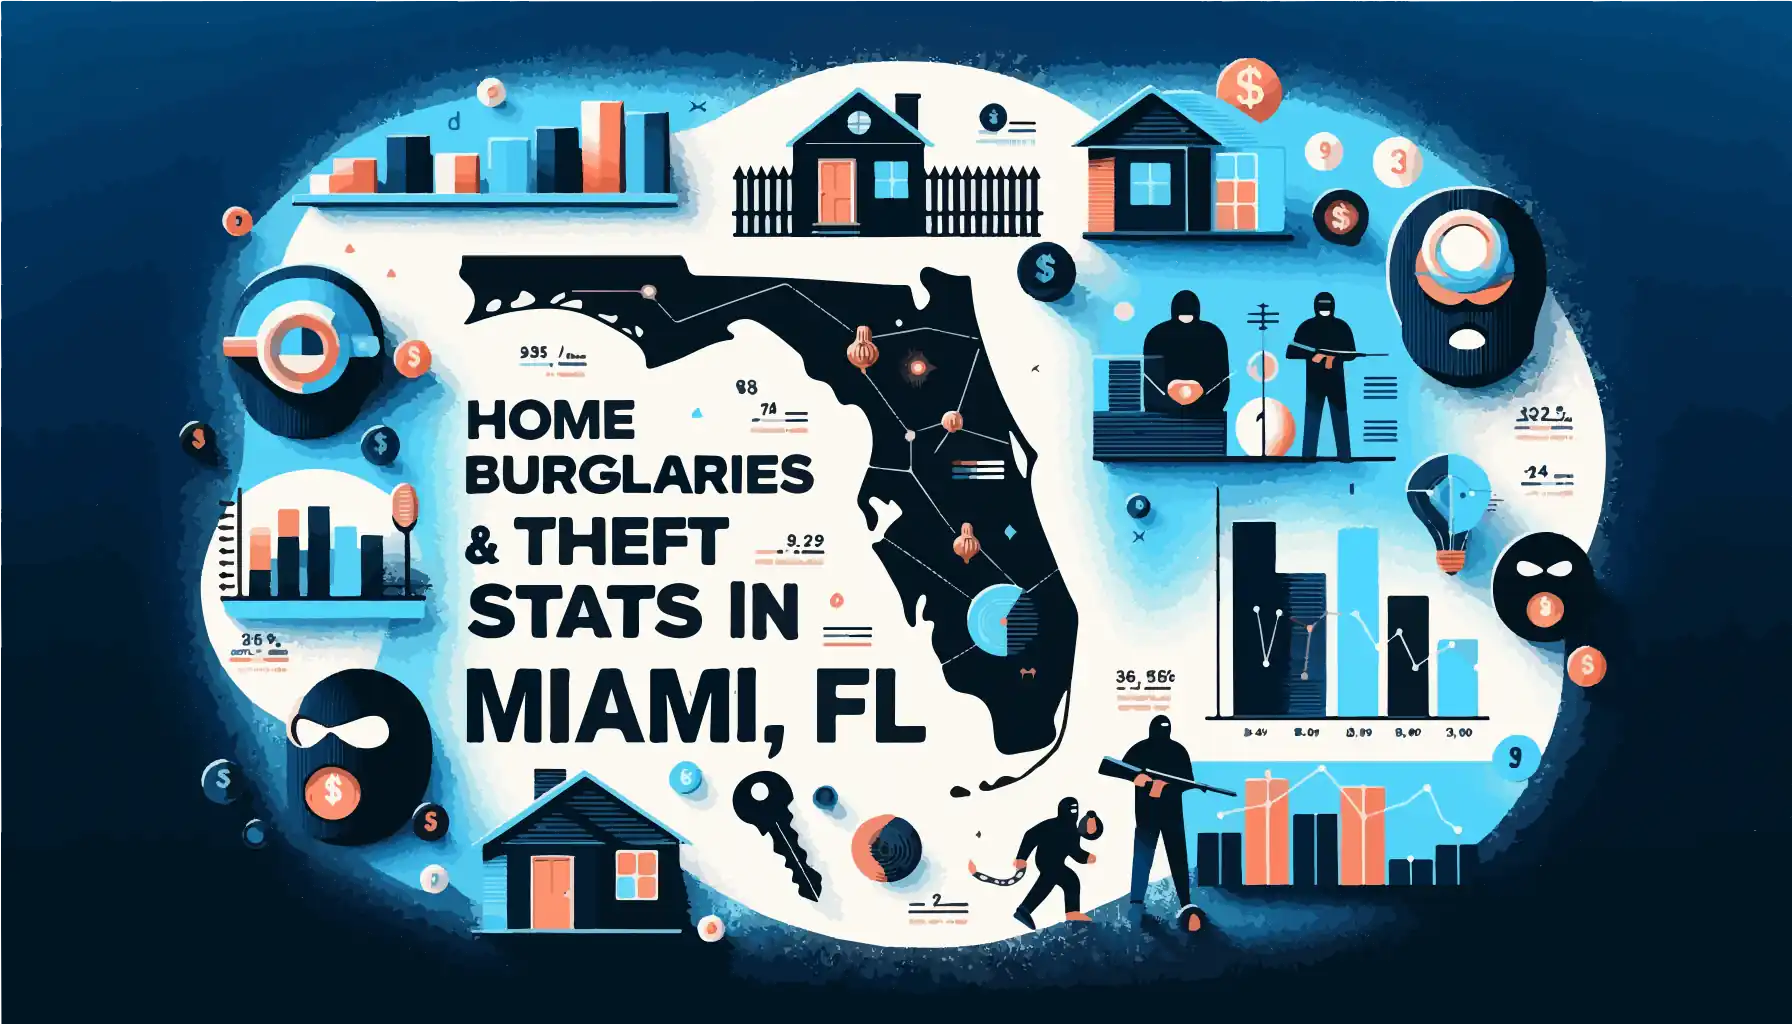 Home Burglaries and Theft Stats in Miami FL